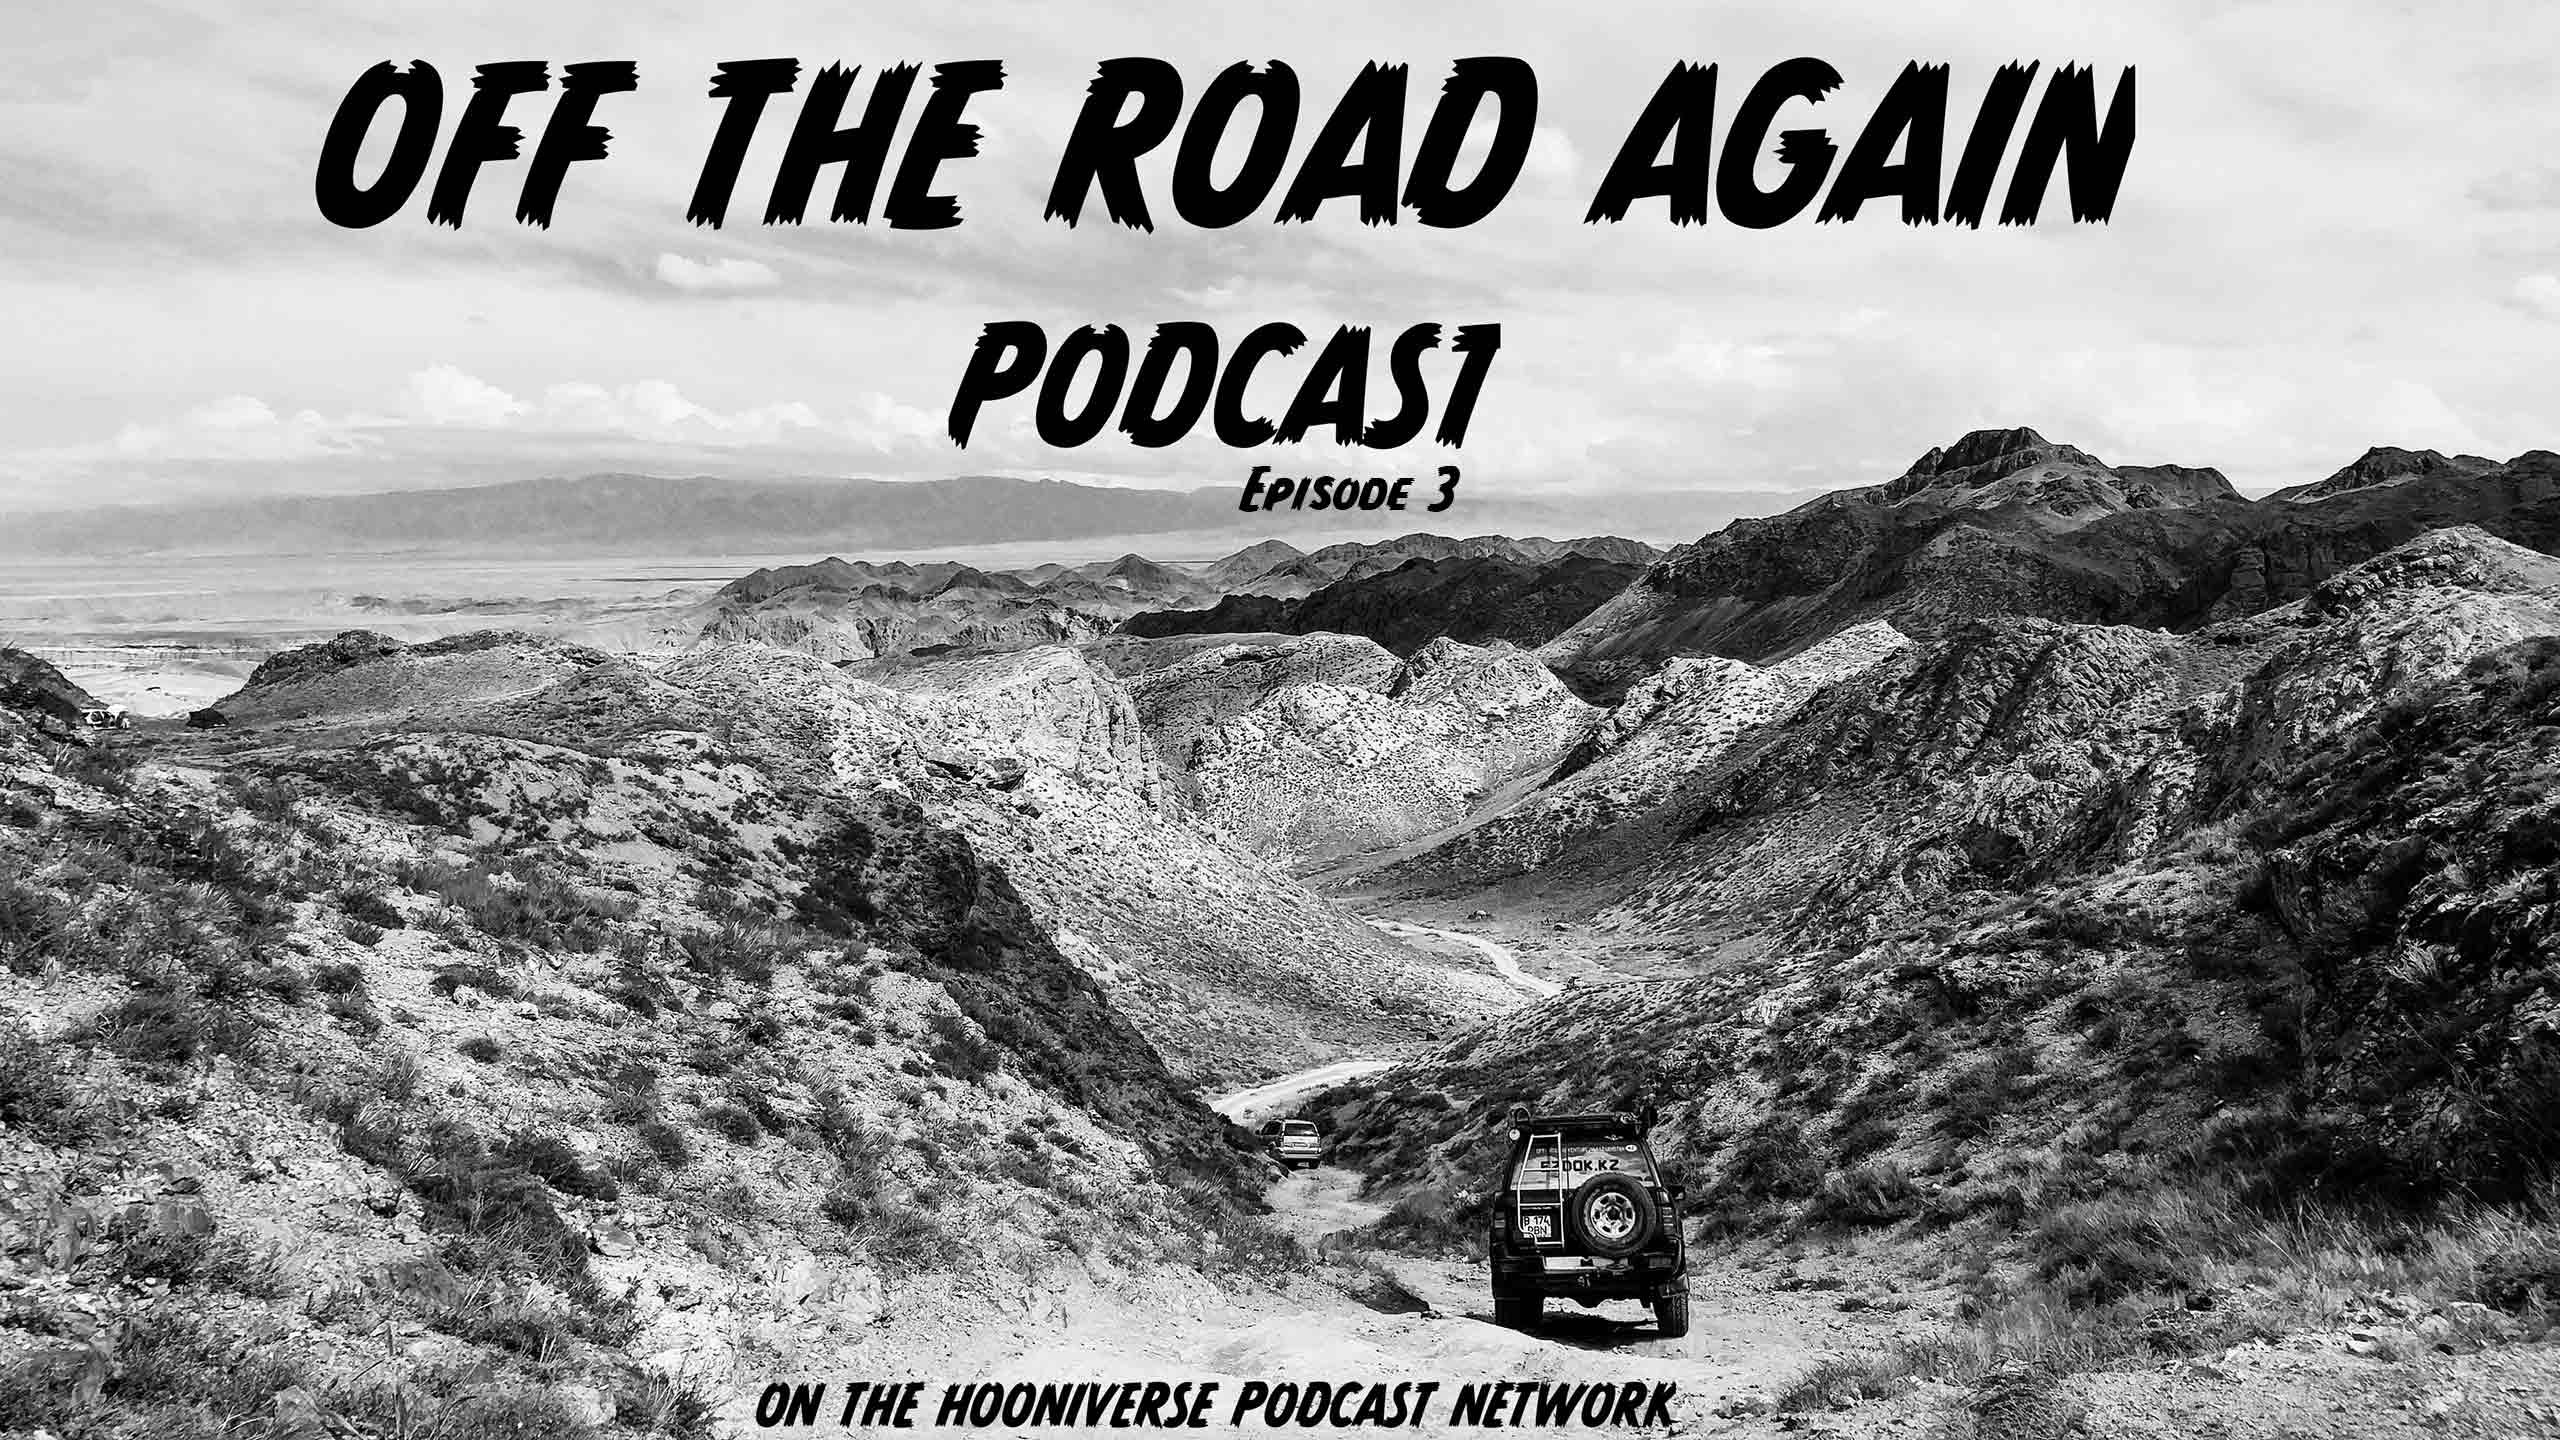 Off the Road Again Podcast: Episode 3 - The Mexican Blanket Tip